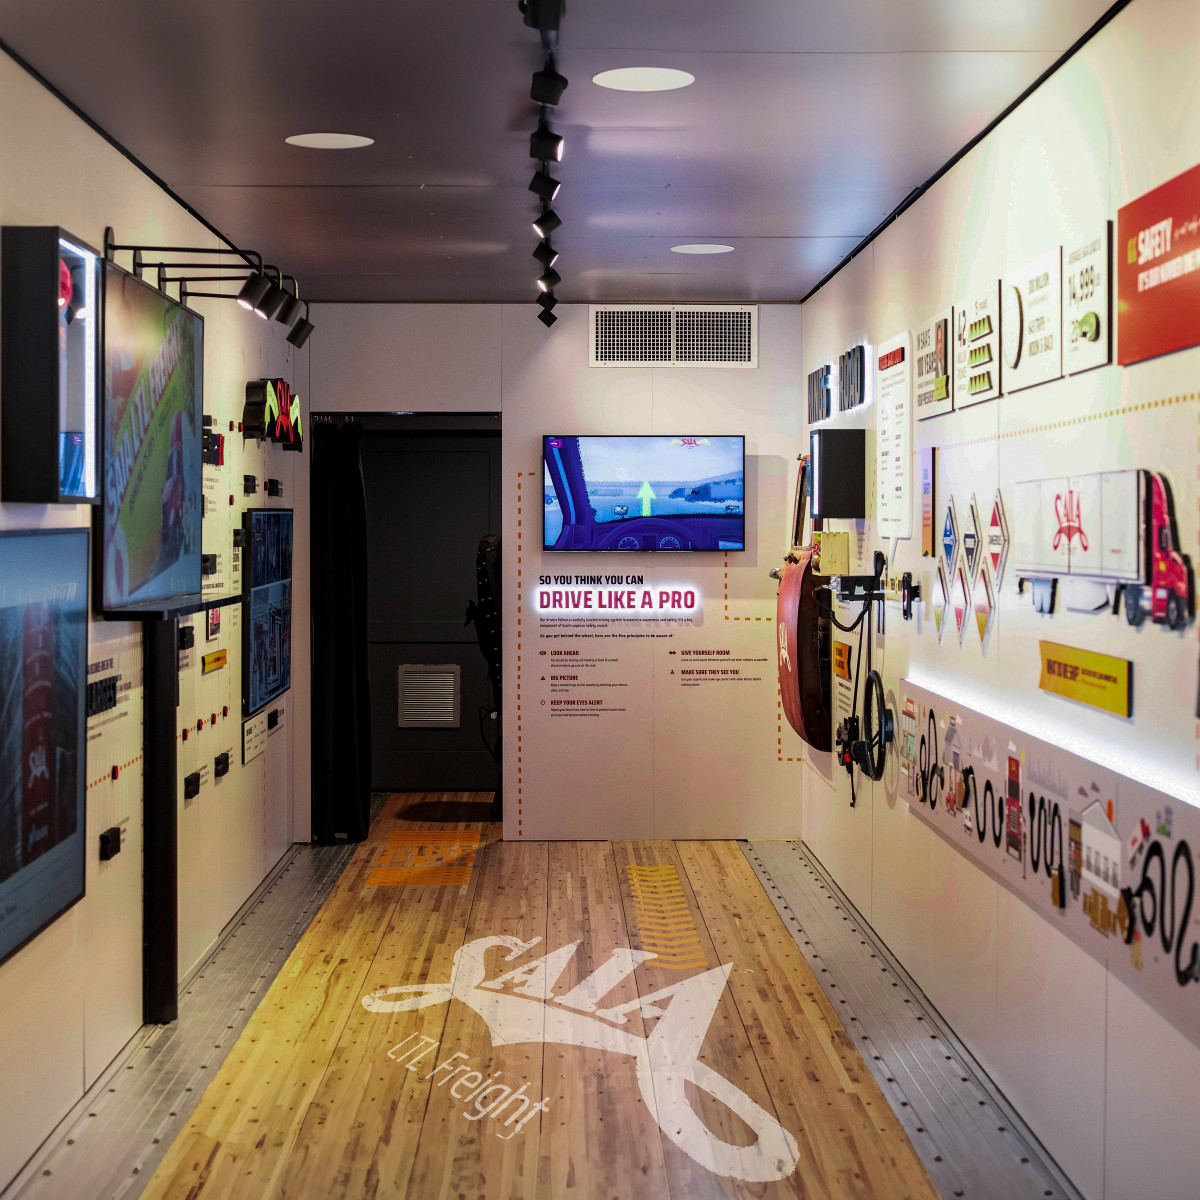 YiJun Jiang wins Iron at the prestigious A' Advertising, Marketing and Communication Design Award with Saia 100 Year Museum Truck Mobile Exhibition.